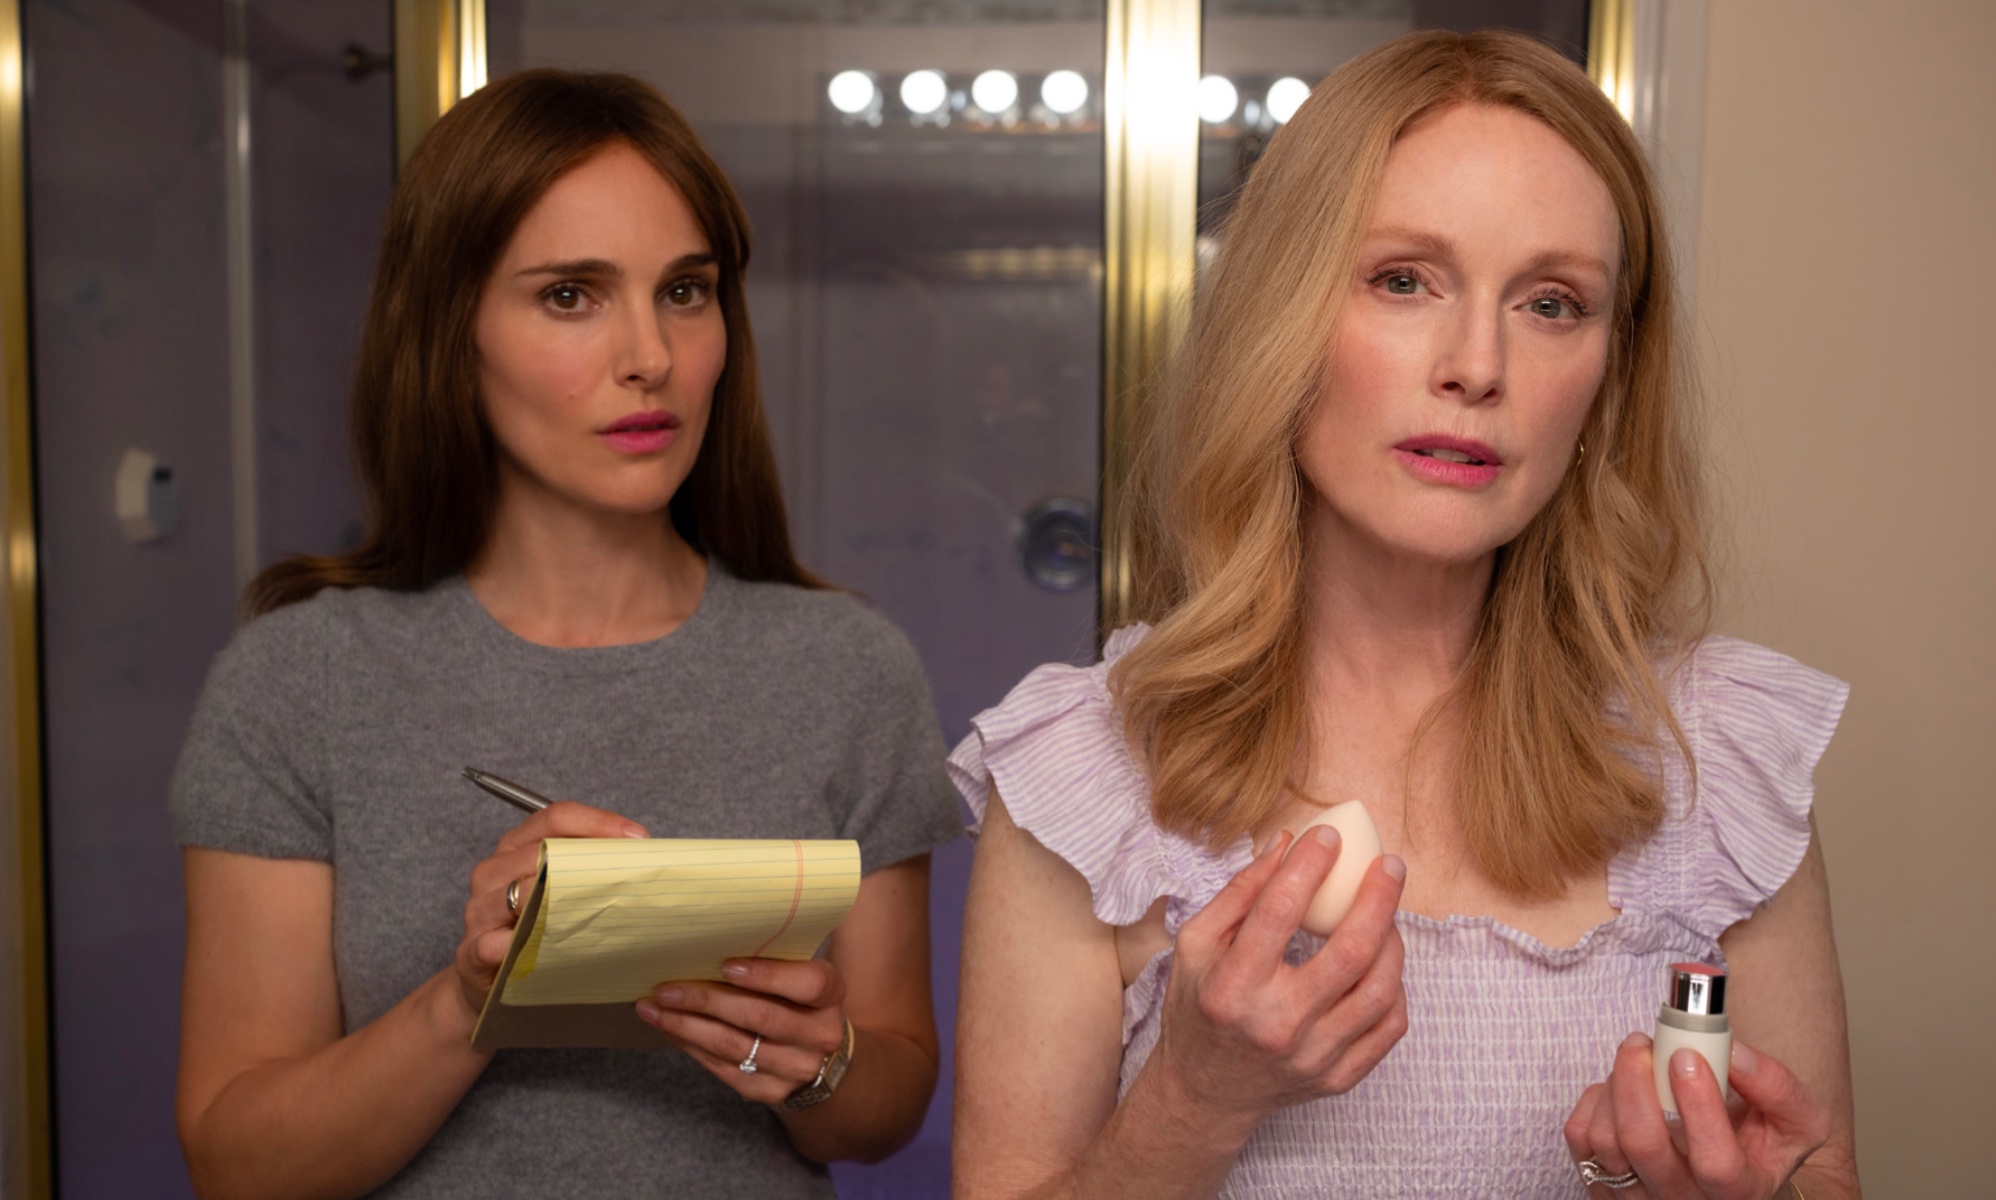 Julianne Moore is Better Than All of Us, So Let's Take a Moment to